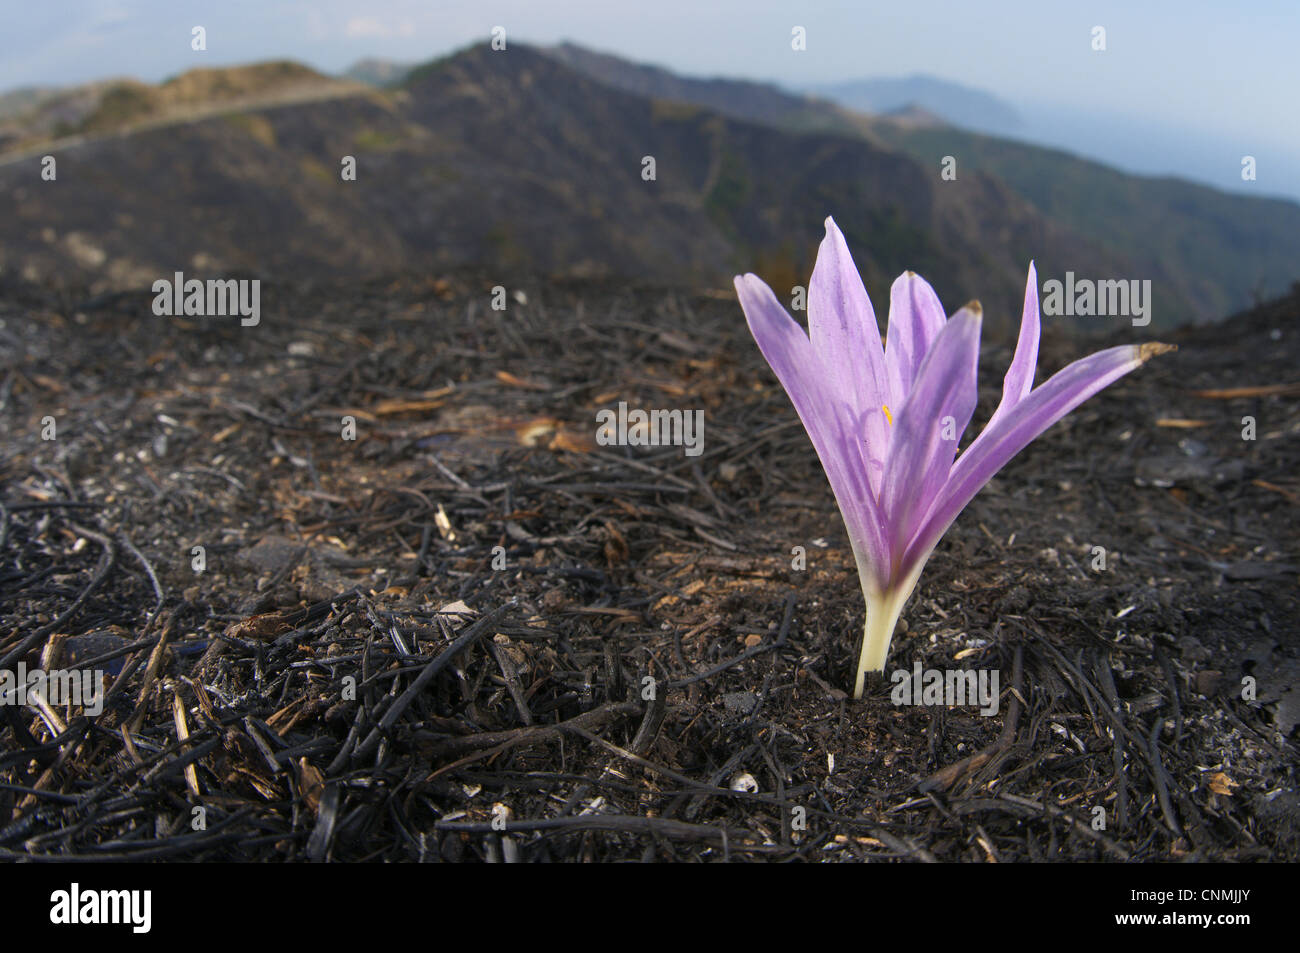 Autumn Crocus (Colchicum sp.) flowering, emerging from ashes of burnt herbs, Italy Stock Photo